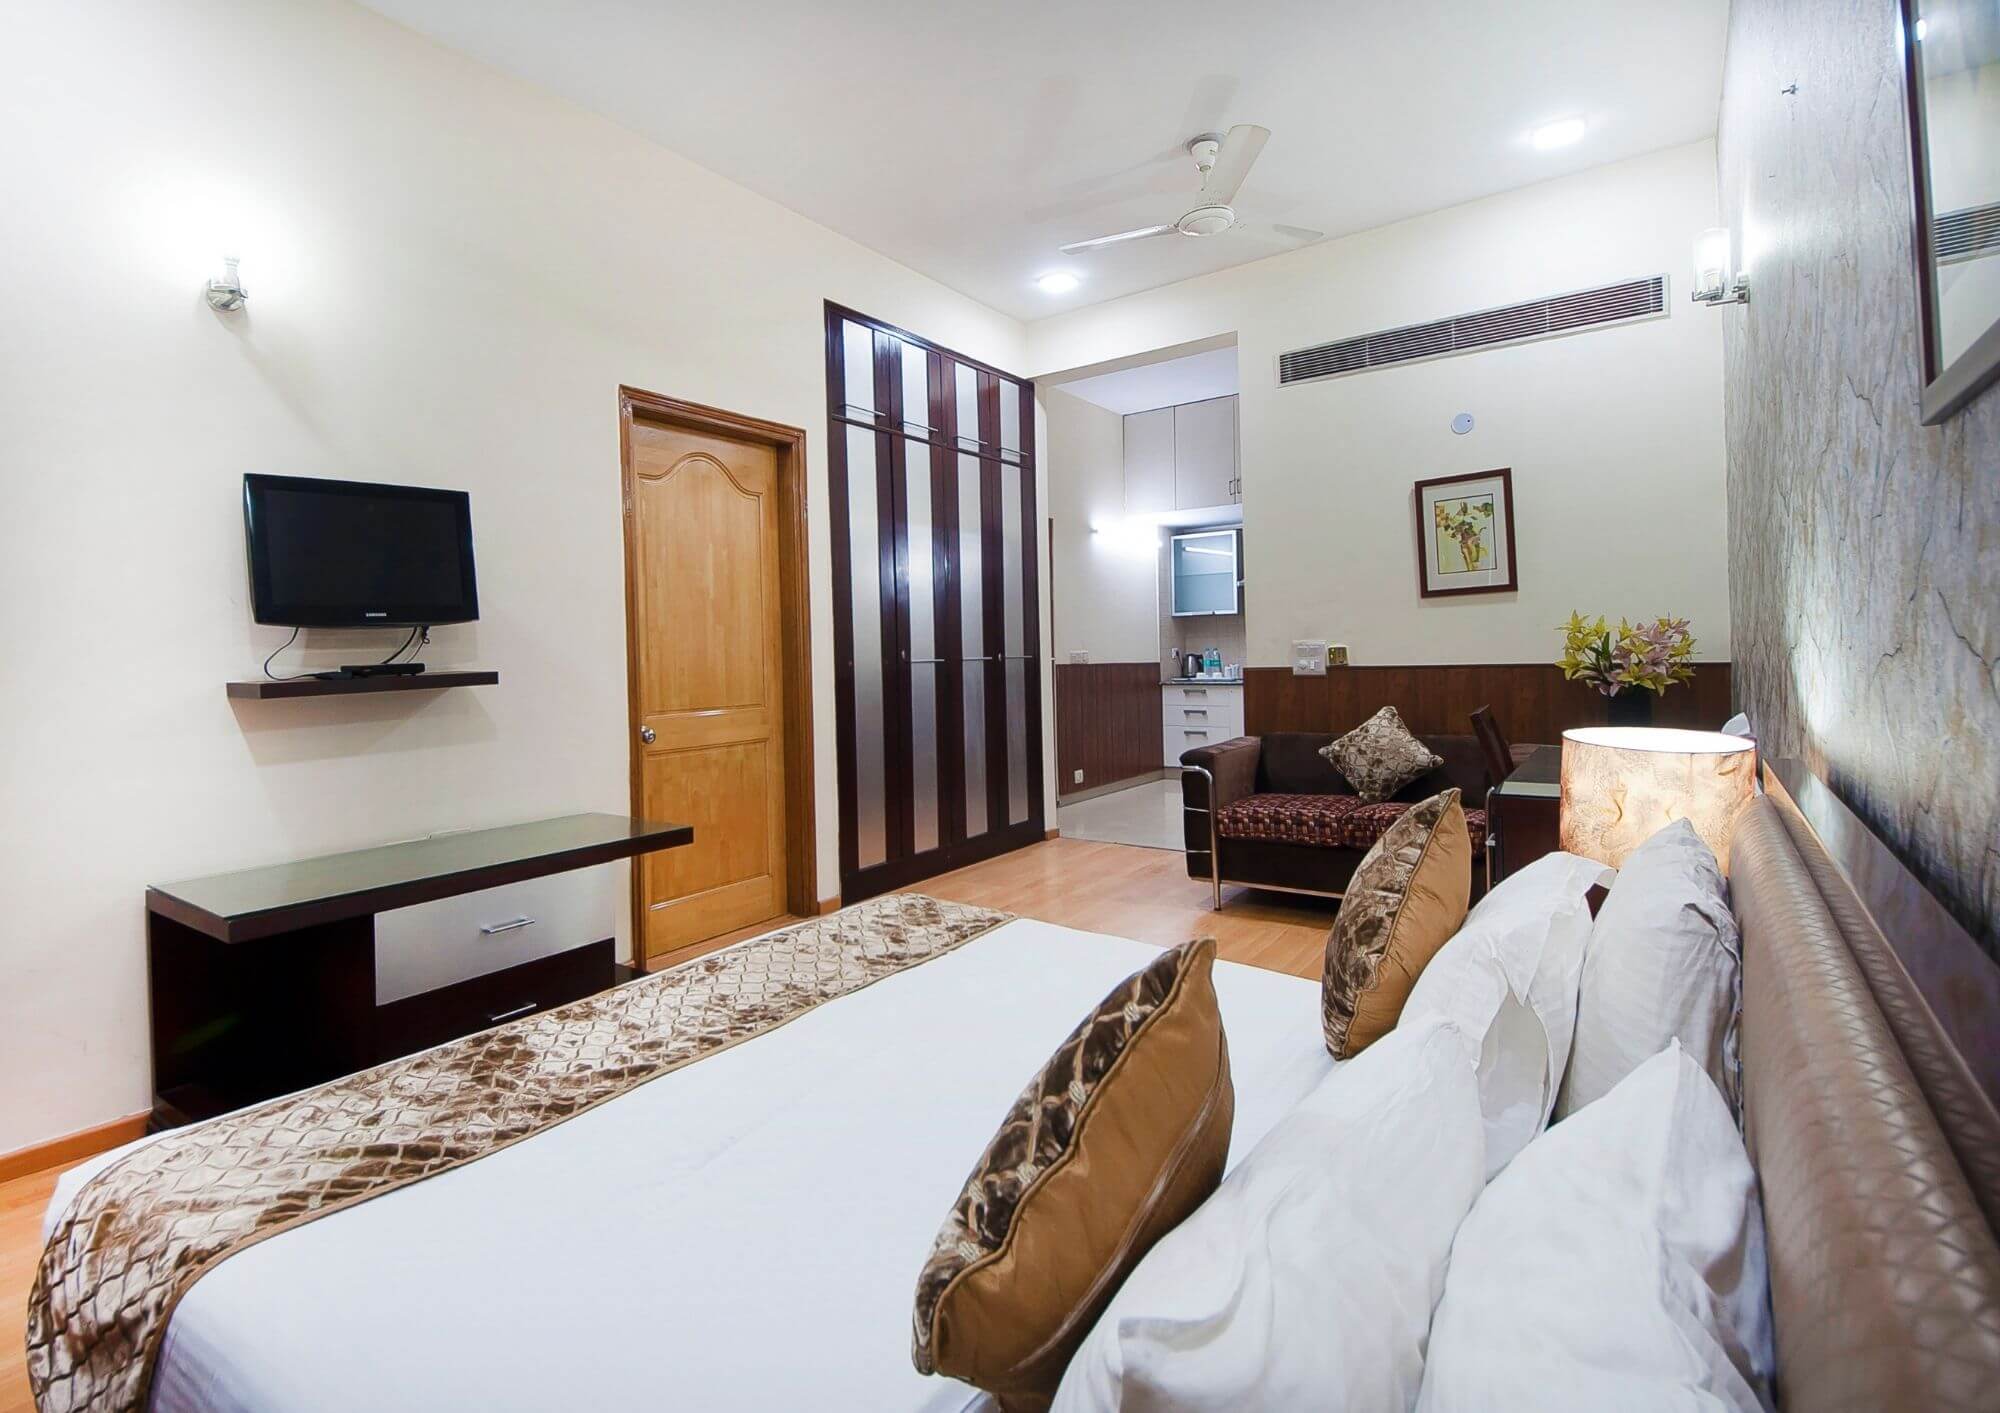 Furnished apartment in Gurgaon with bed, tv, sofa